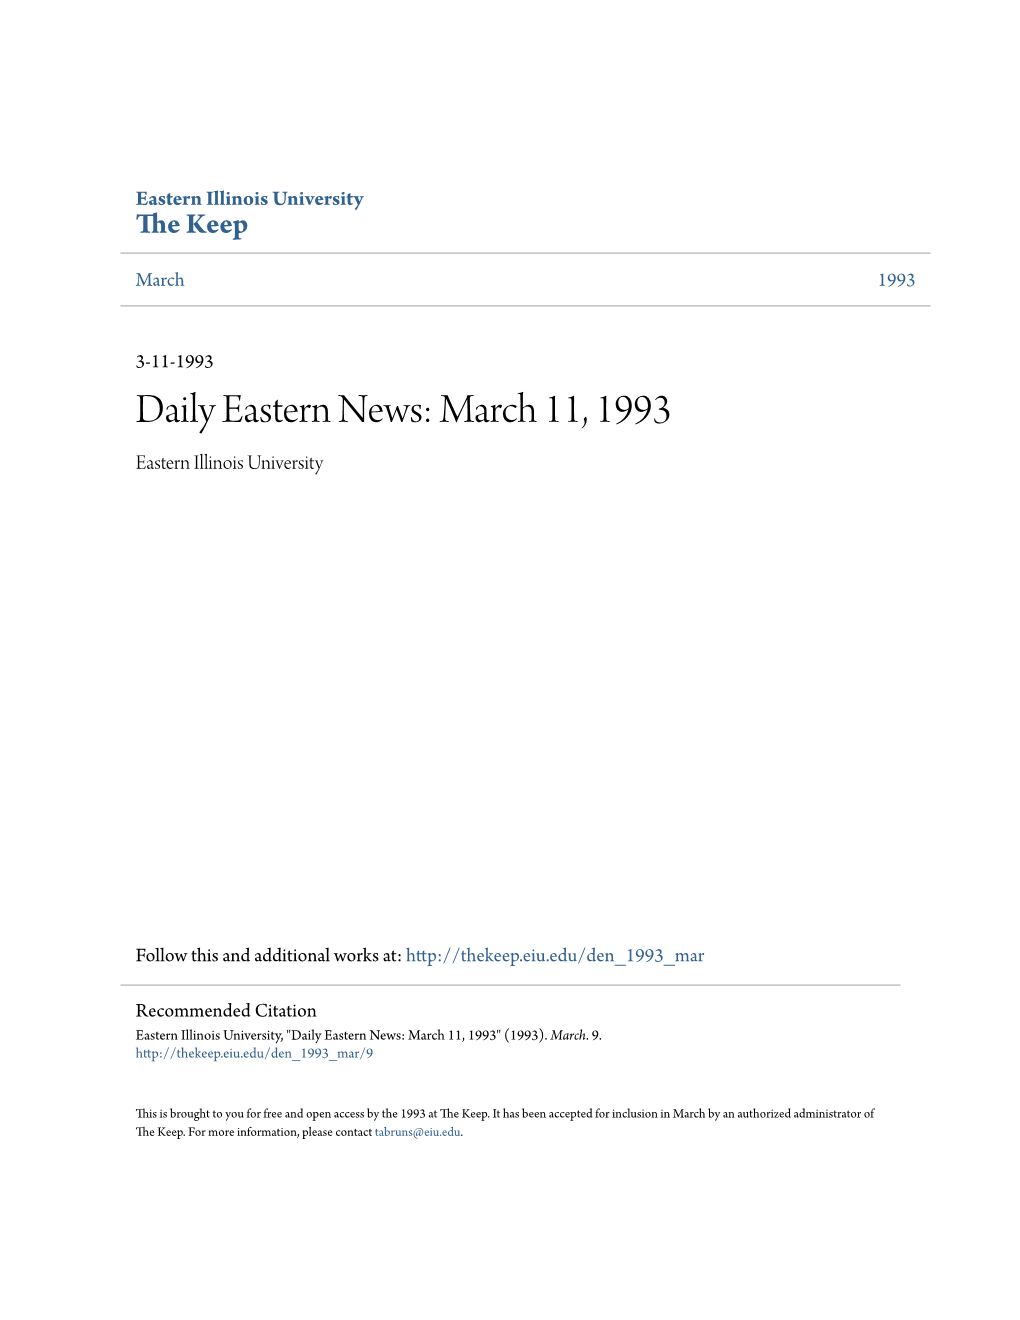 Daily Eastern News: March 11, 1993 Eastern Illinois University